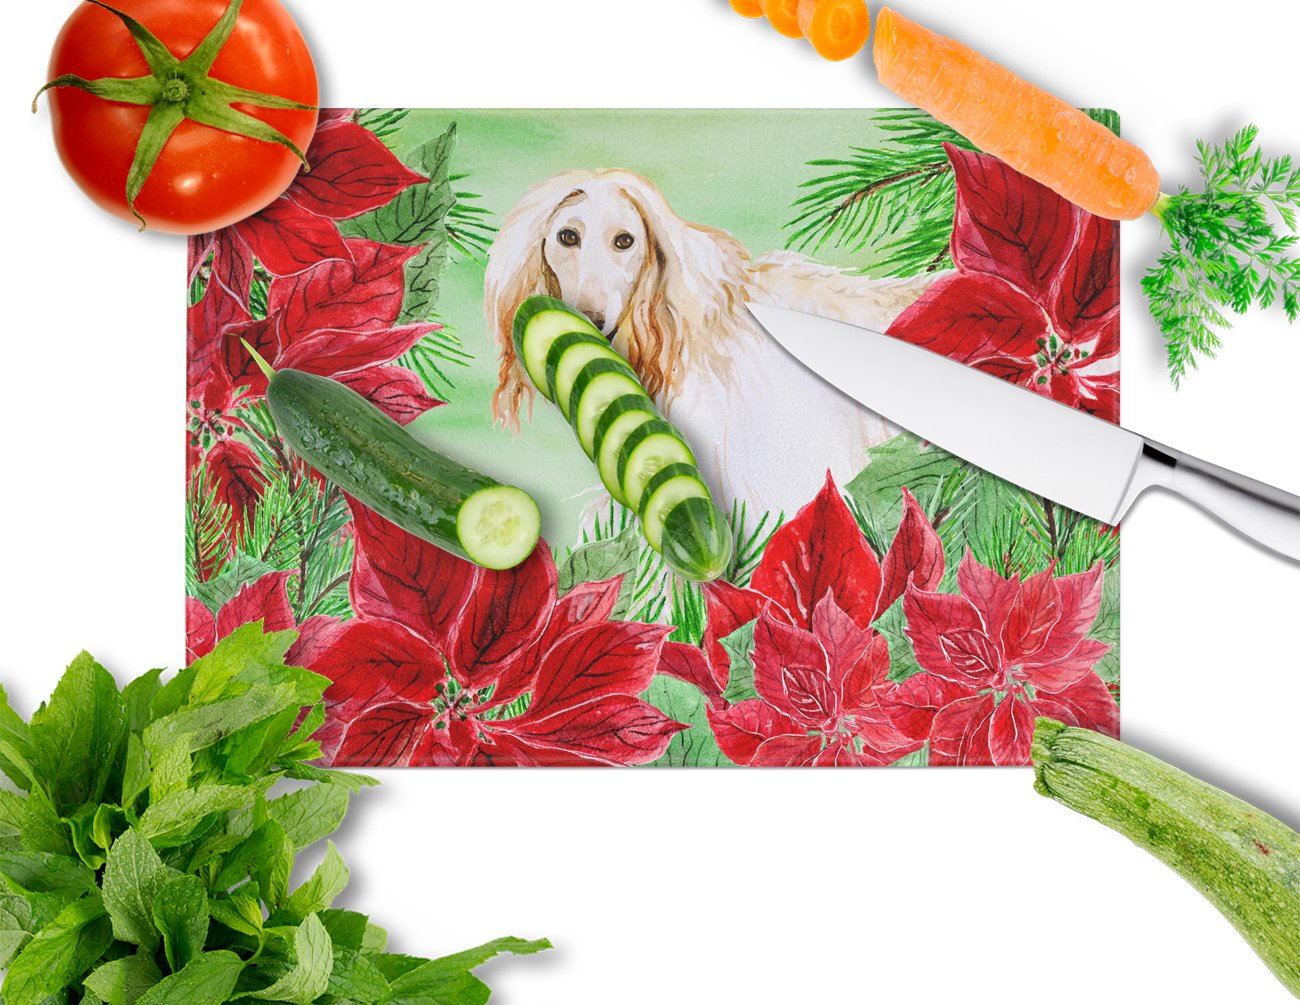 Afghan Hound Poinsettas Glass Cutting Board Large CK1350LCB by Caroline's Treasures